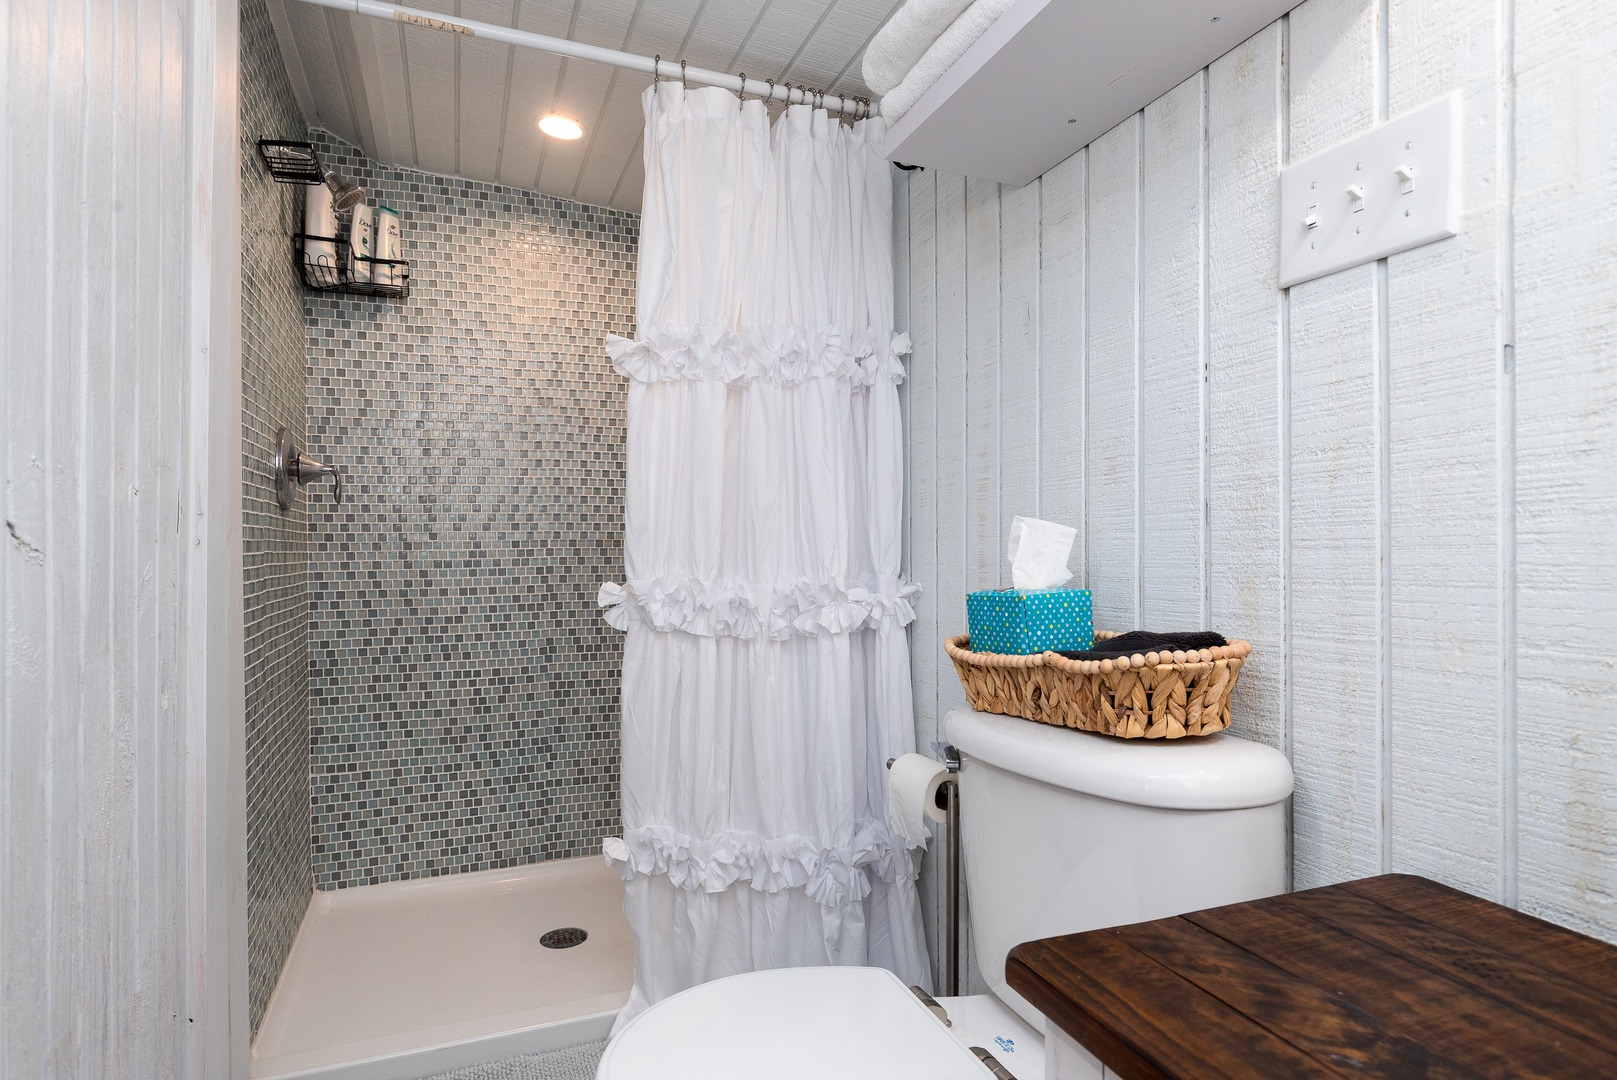 The full bathroom offers closet space, a single vanity & walk-in shower